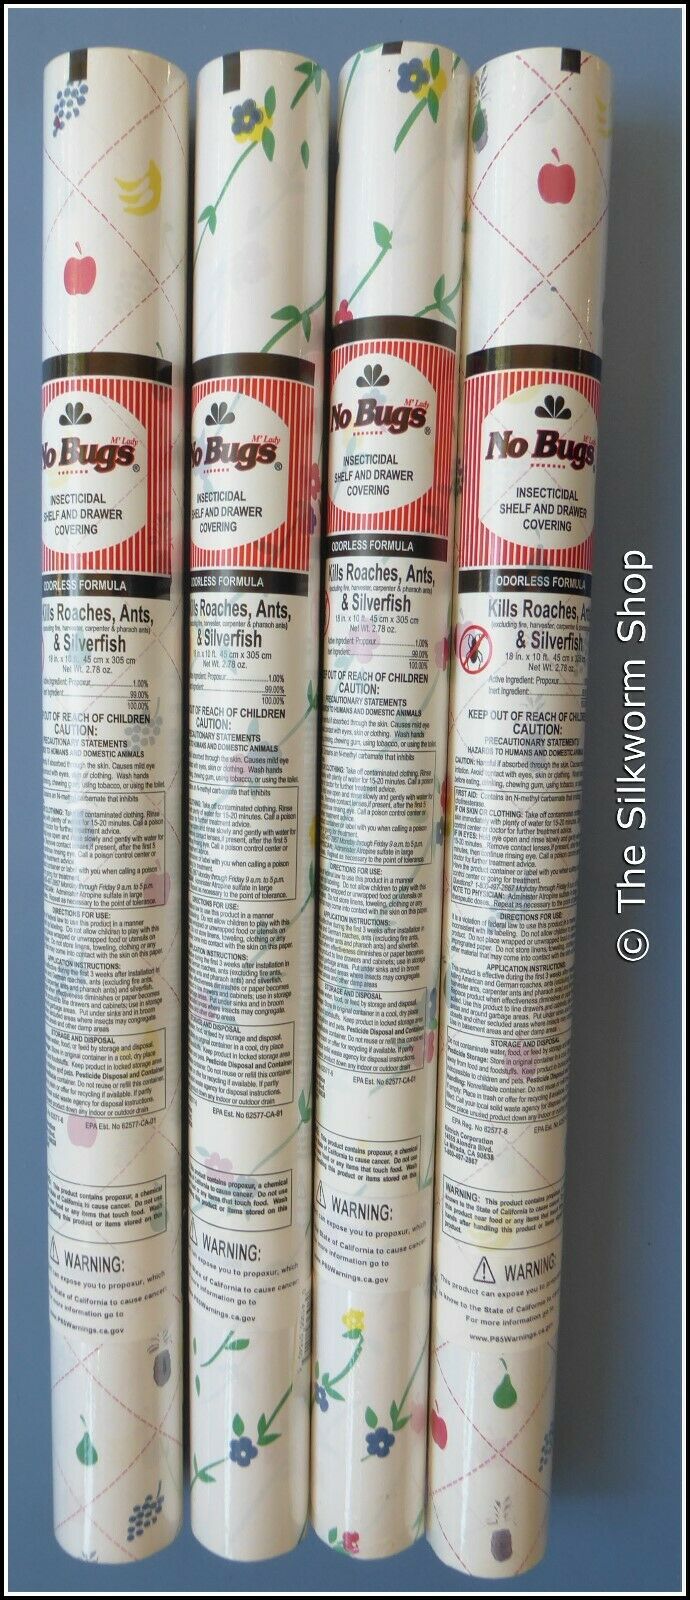 No Bugs M'lady Insecticidal Shelf & Drawer Liner 1 Roll - Kills & Controls Pests